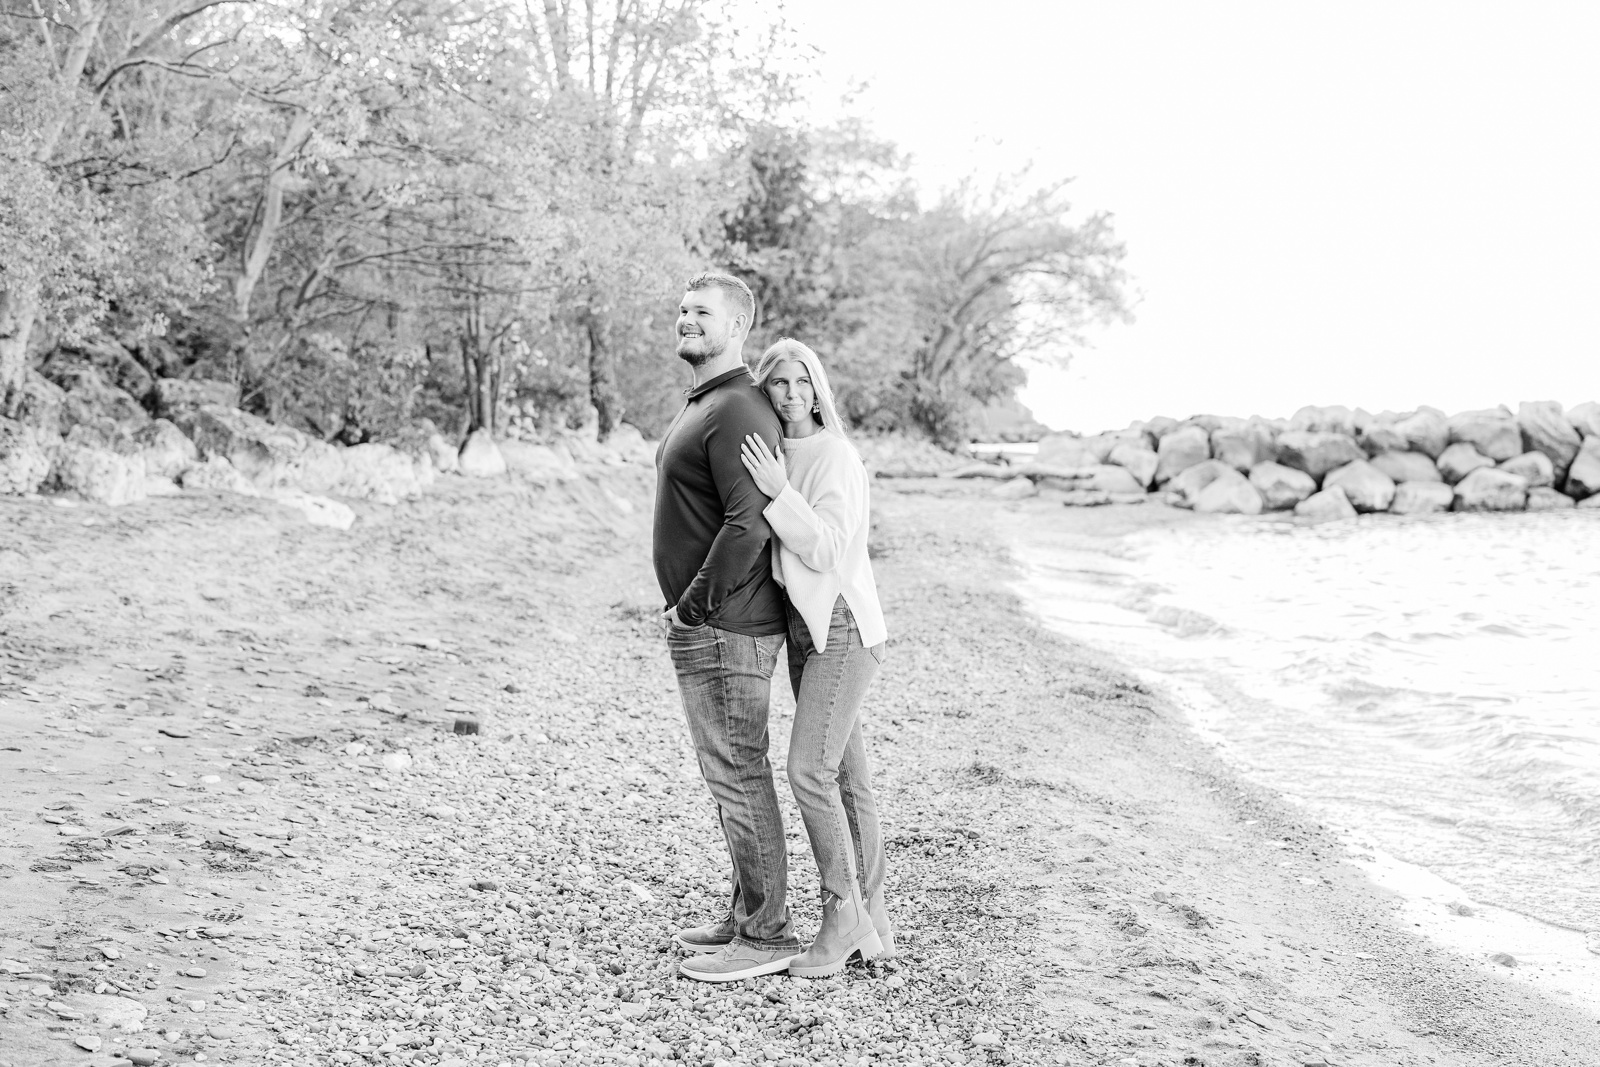 Fall Engagement Session in Cleveland Ohio